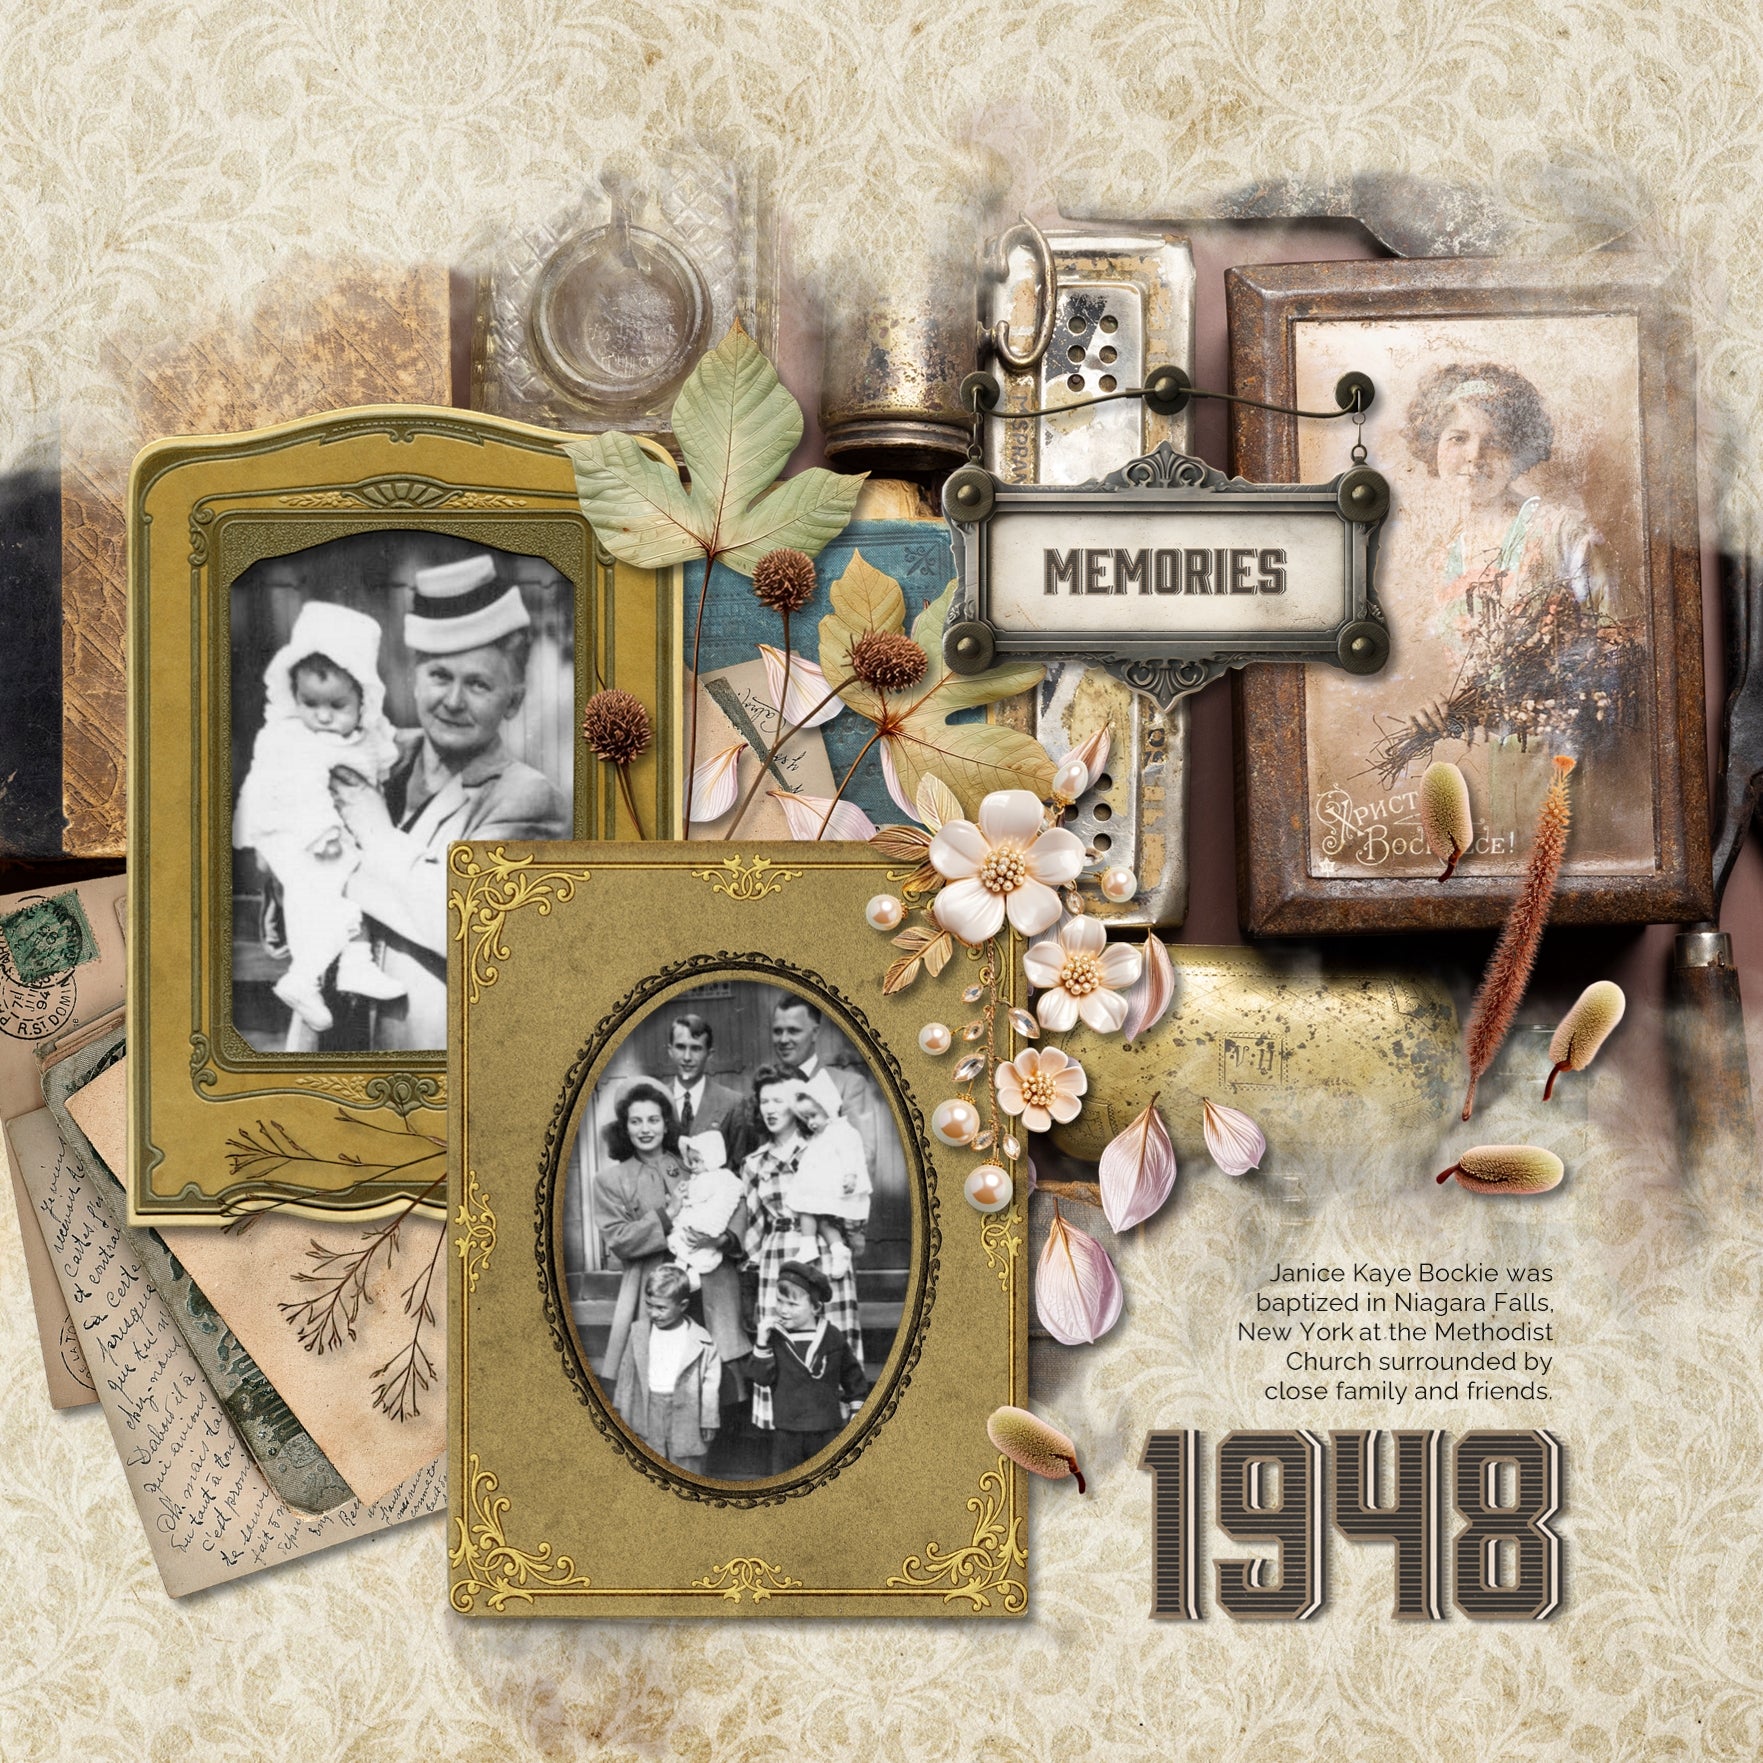 Great for genealogy and family history albums and keepsake digital art pages, these beautiful vintage overlays with transparent edges by Lucky Girl Creative blend seamlessly into any background paper and make the perfect backdrop for authentic scrapbook pages. Topics include books, music, vintage objects, and photographs.